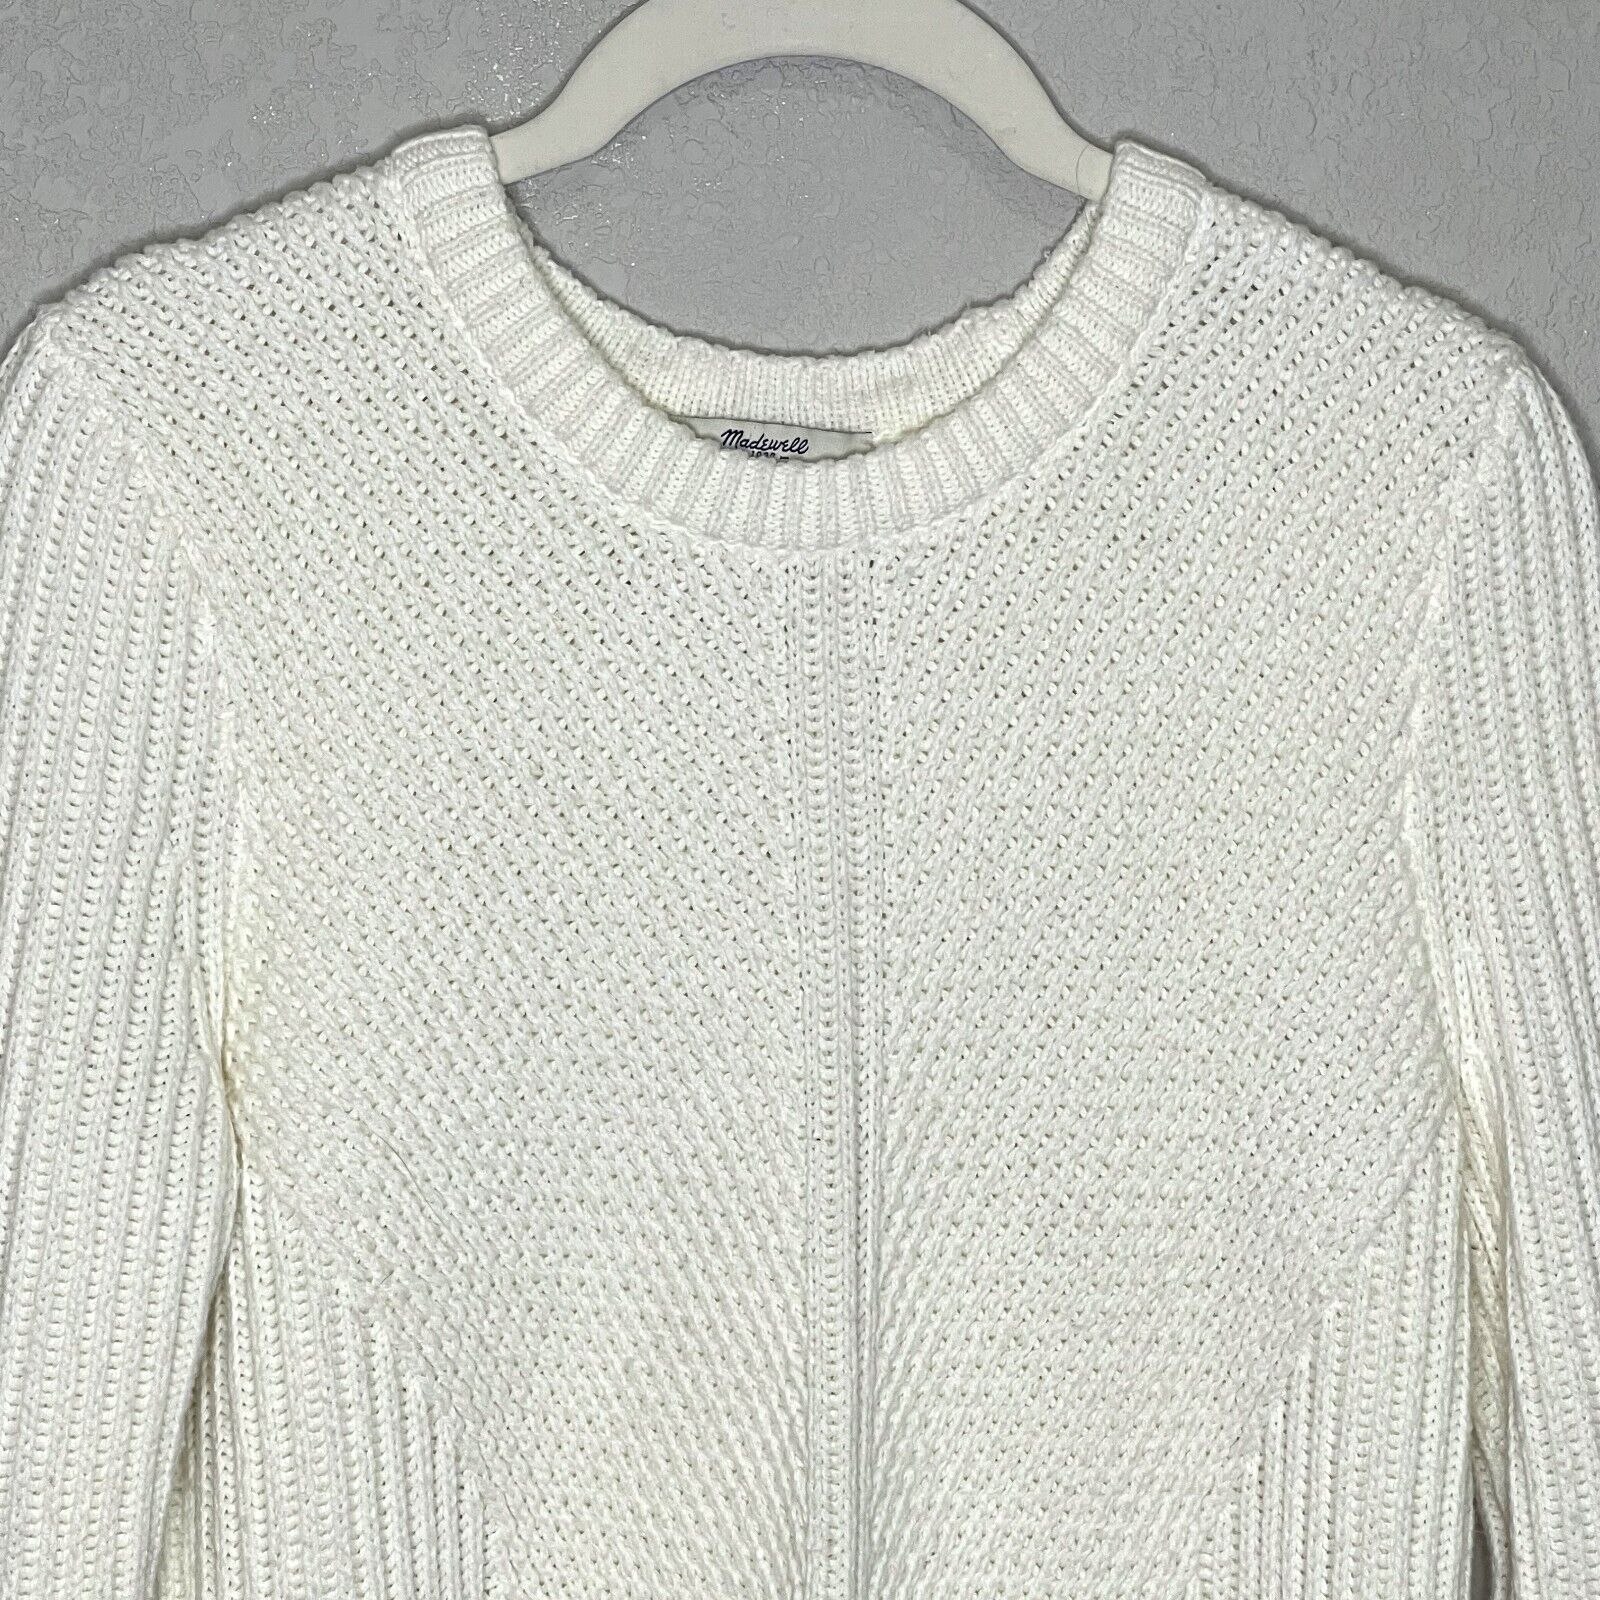 Madewell Ivory Holcomb Textured Ribbed Sweater Pullover Size Small